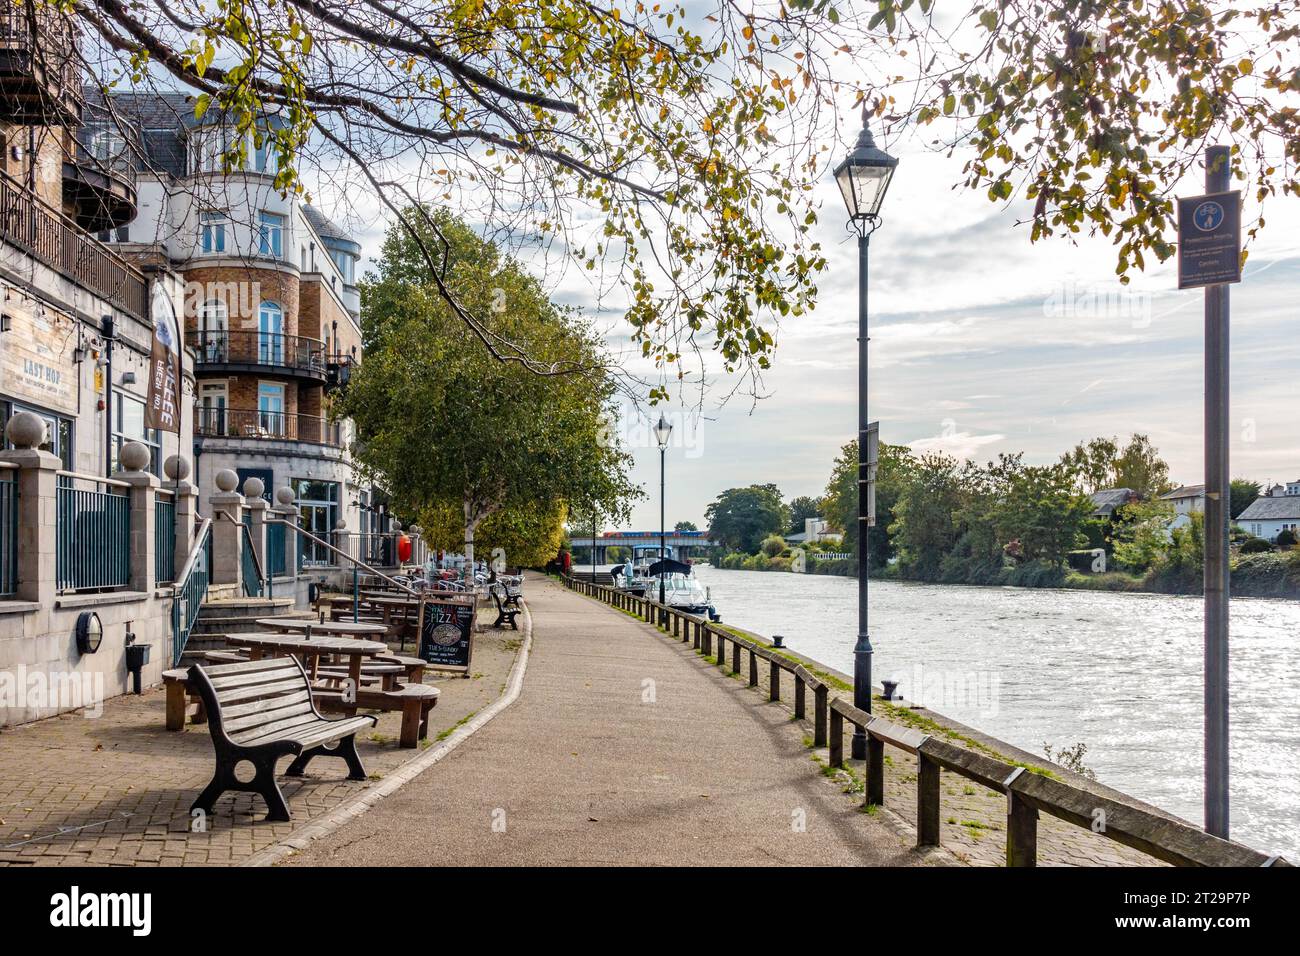 A view down The River Thames at Staines-upon-Thames past The Slug and Lettuce pub with tables and benches outside. Stock Photo